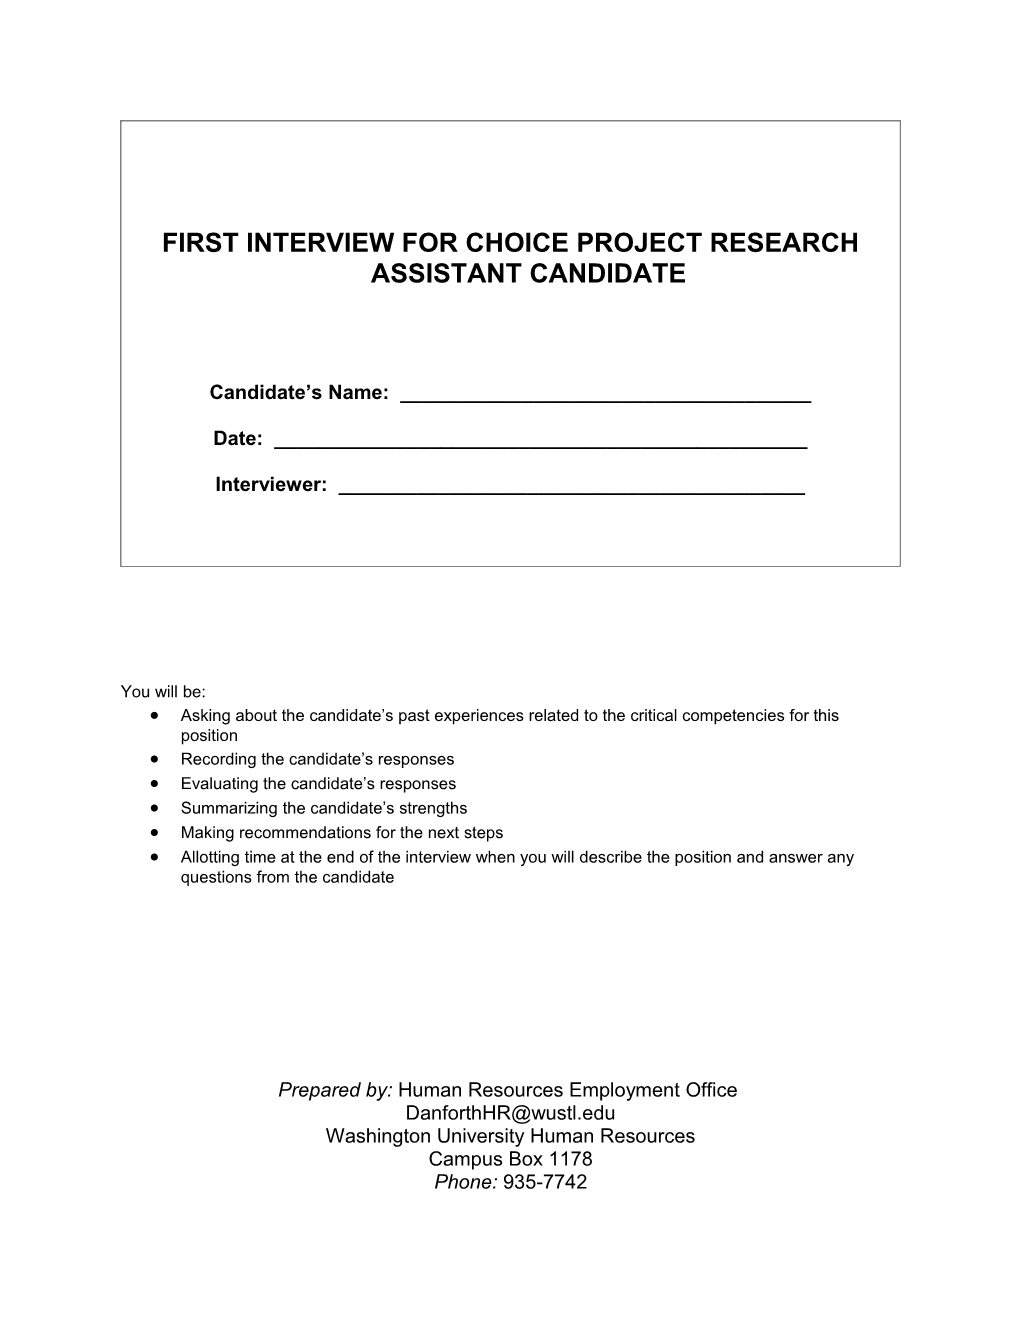 Interview Guide: Administrative Assistant I - Research